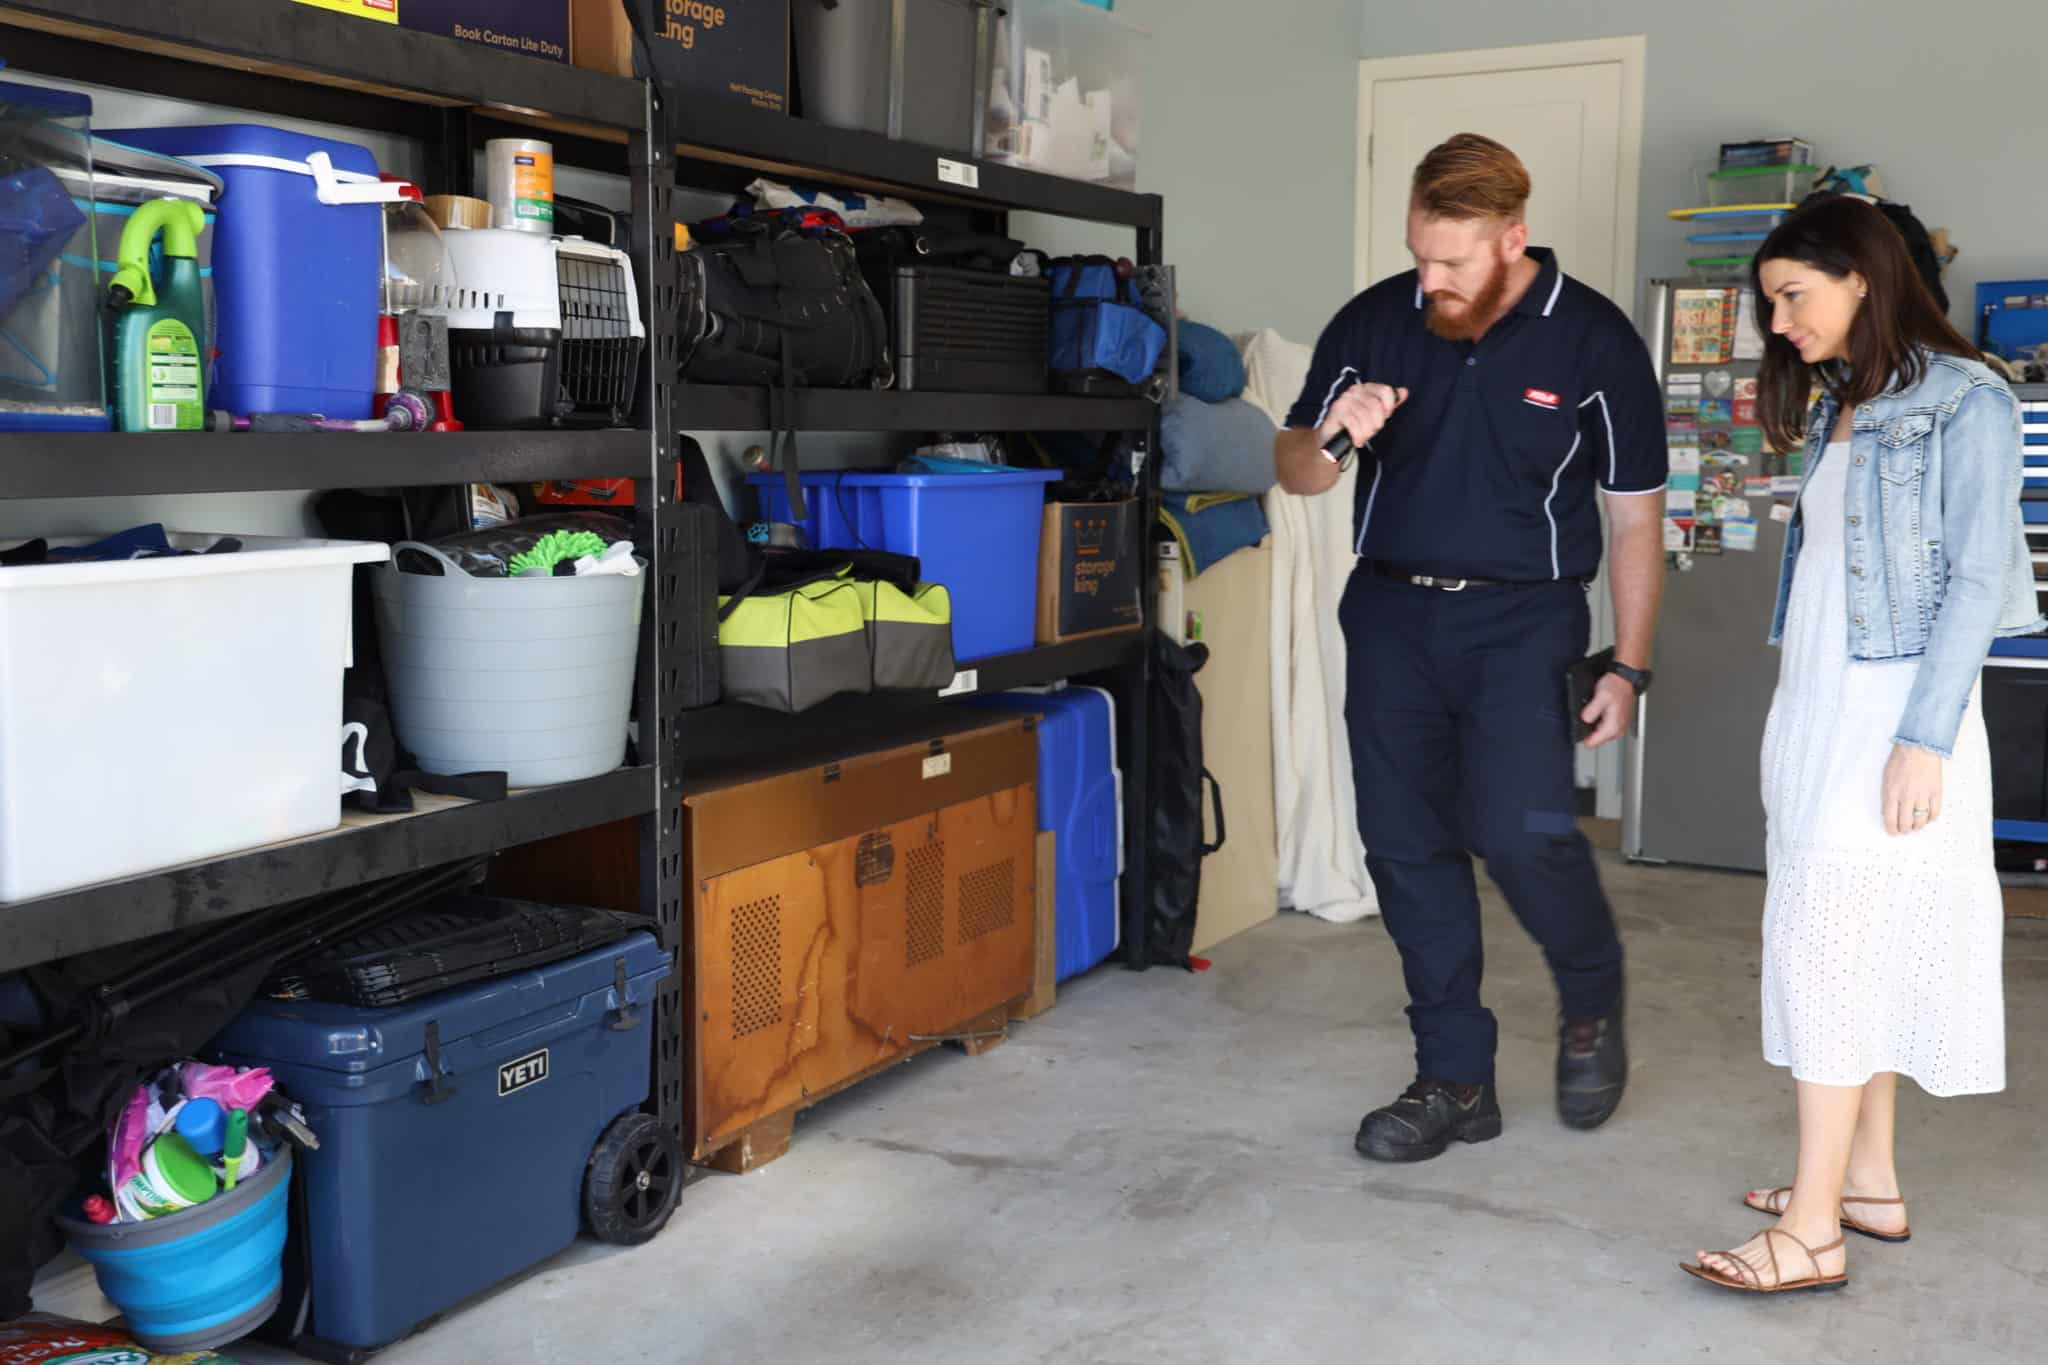 What Are The Most Common Pests Found In Storage Areas?